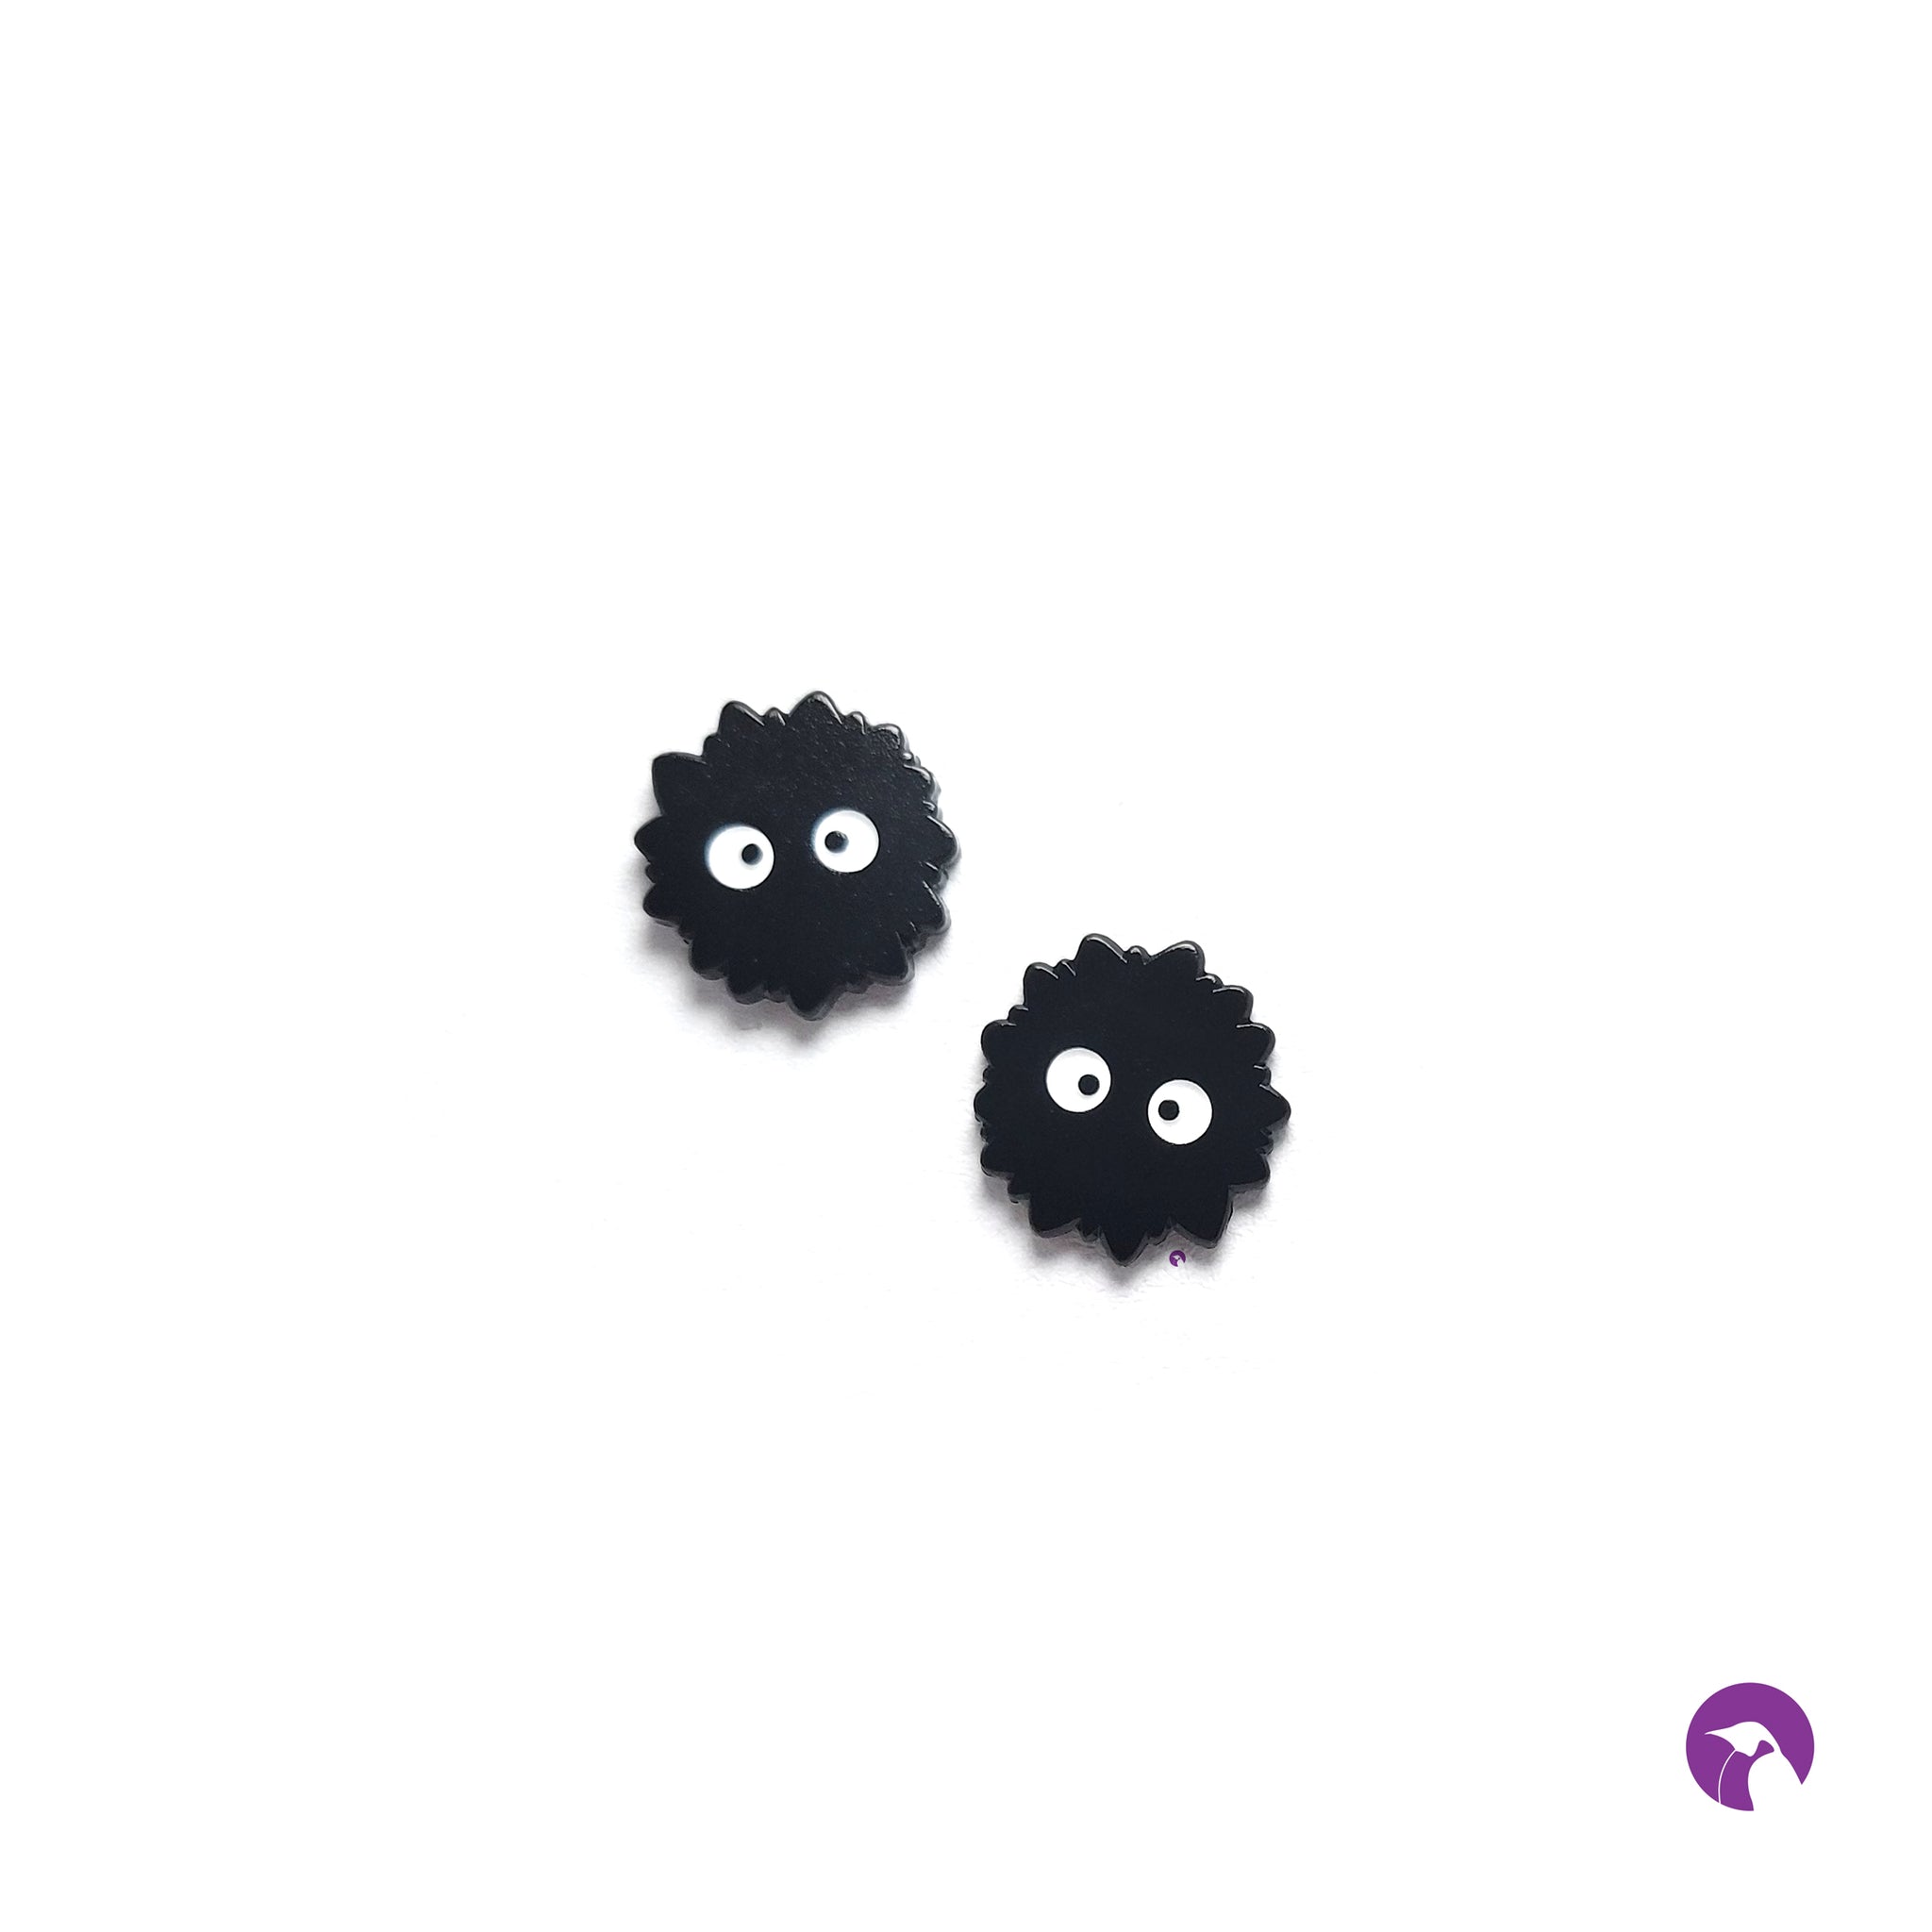 Dyed Soot Sprite Pin Set - 2 Piece